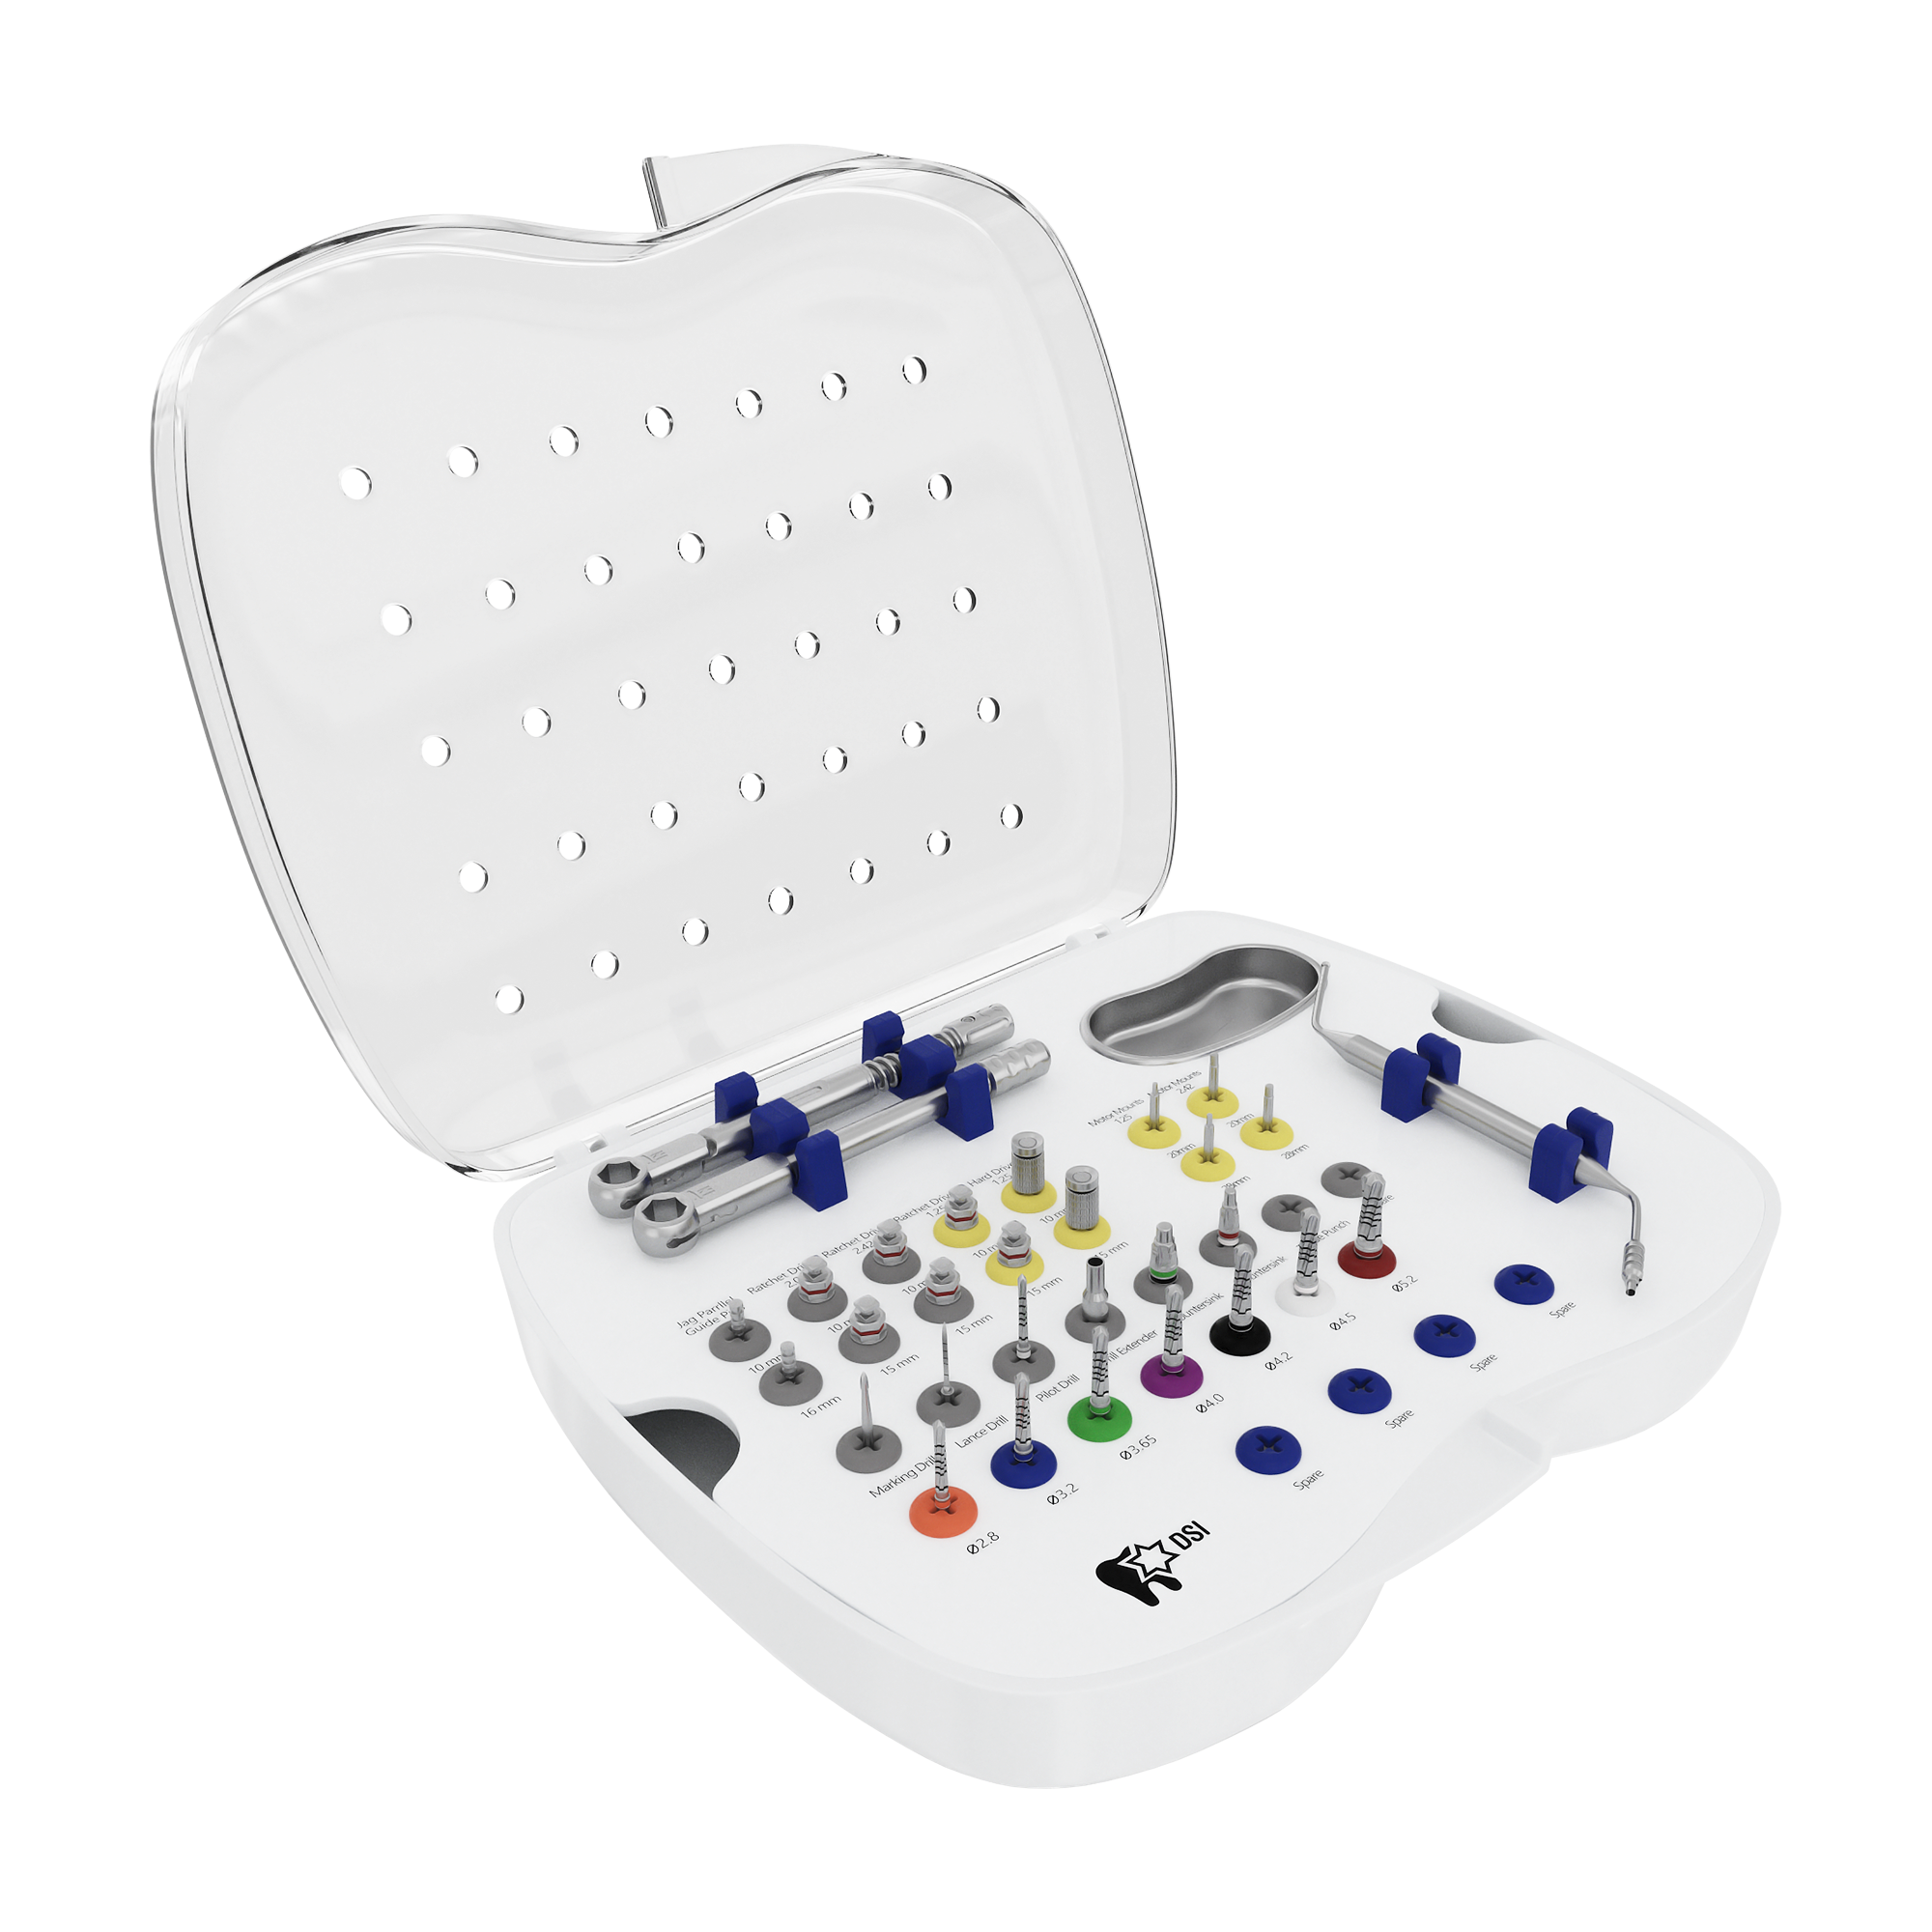 DSI SK003 Full Surgical Kit For Implant Placement